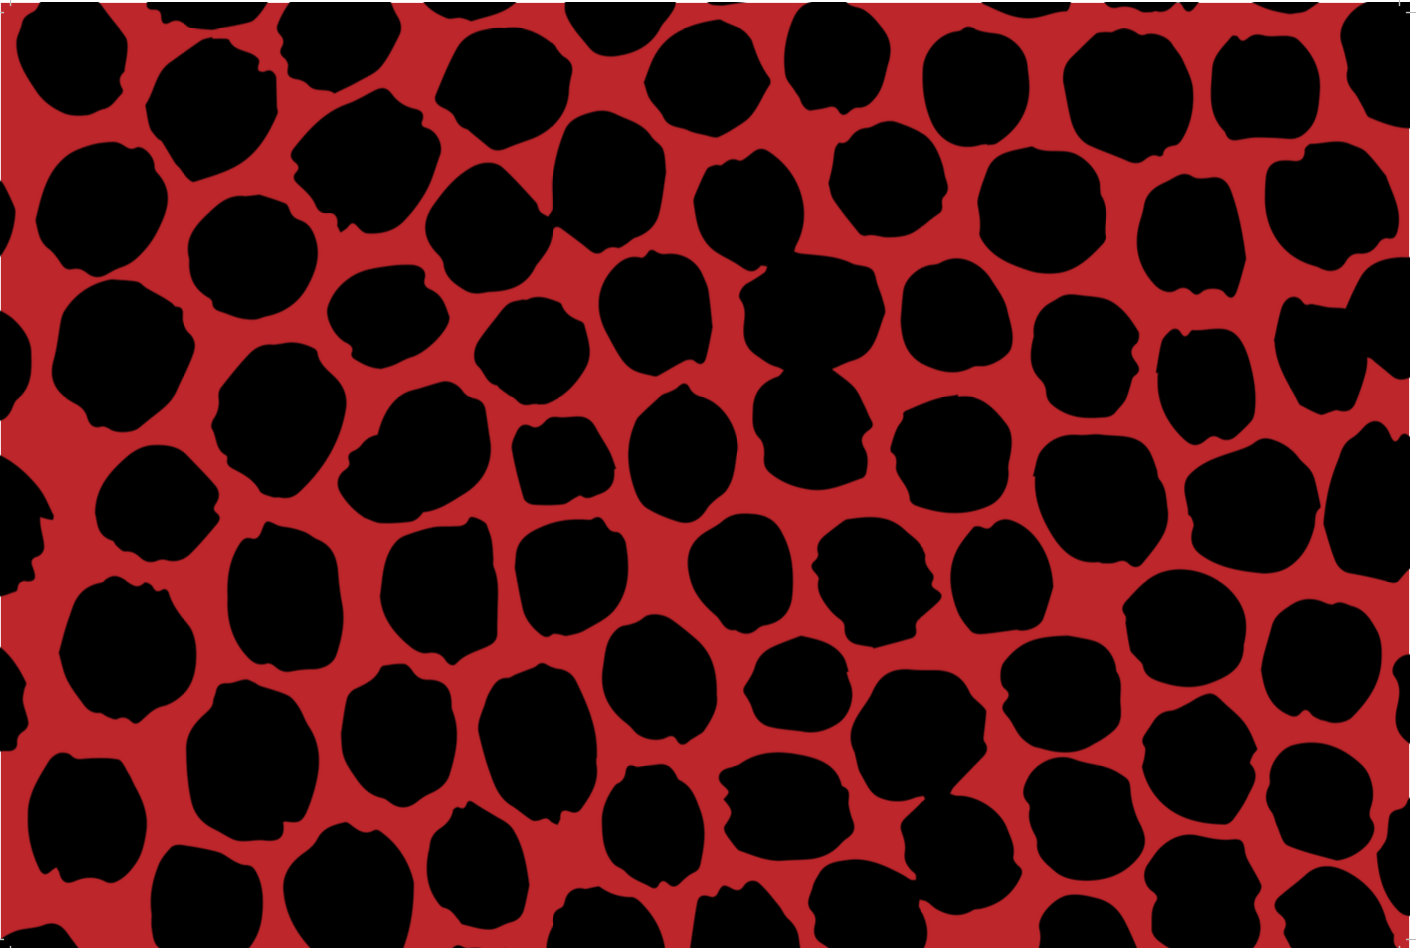 Red and Black Dots Paper Placemats